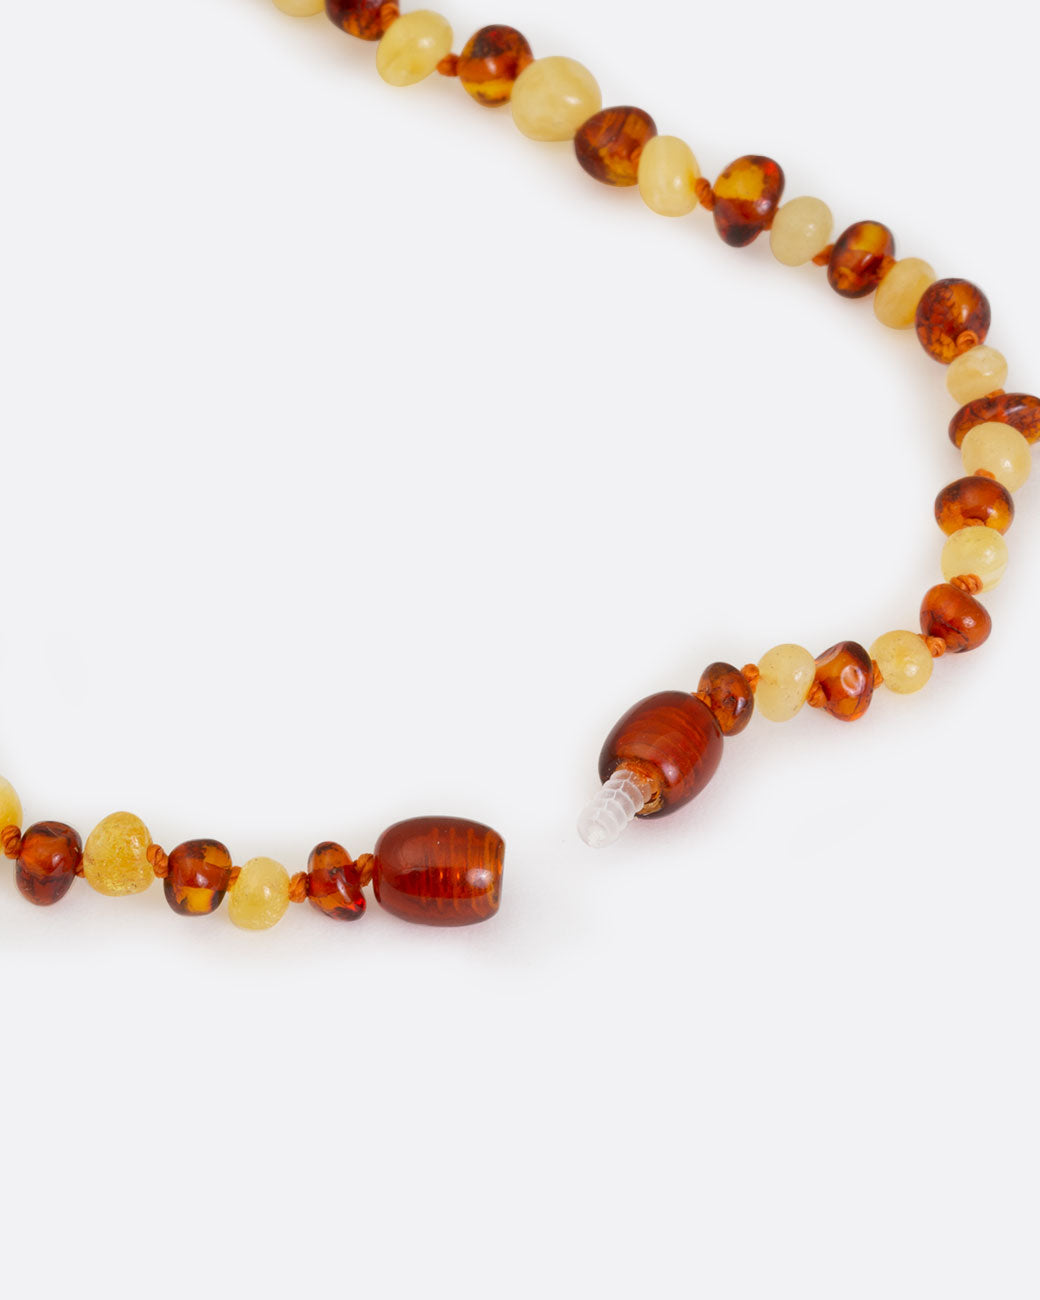 Multicolor amber teething necklace, shown unclasped.